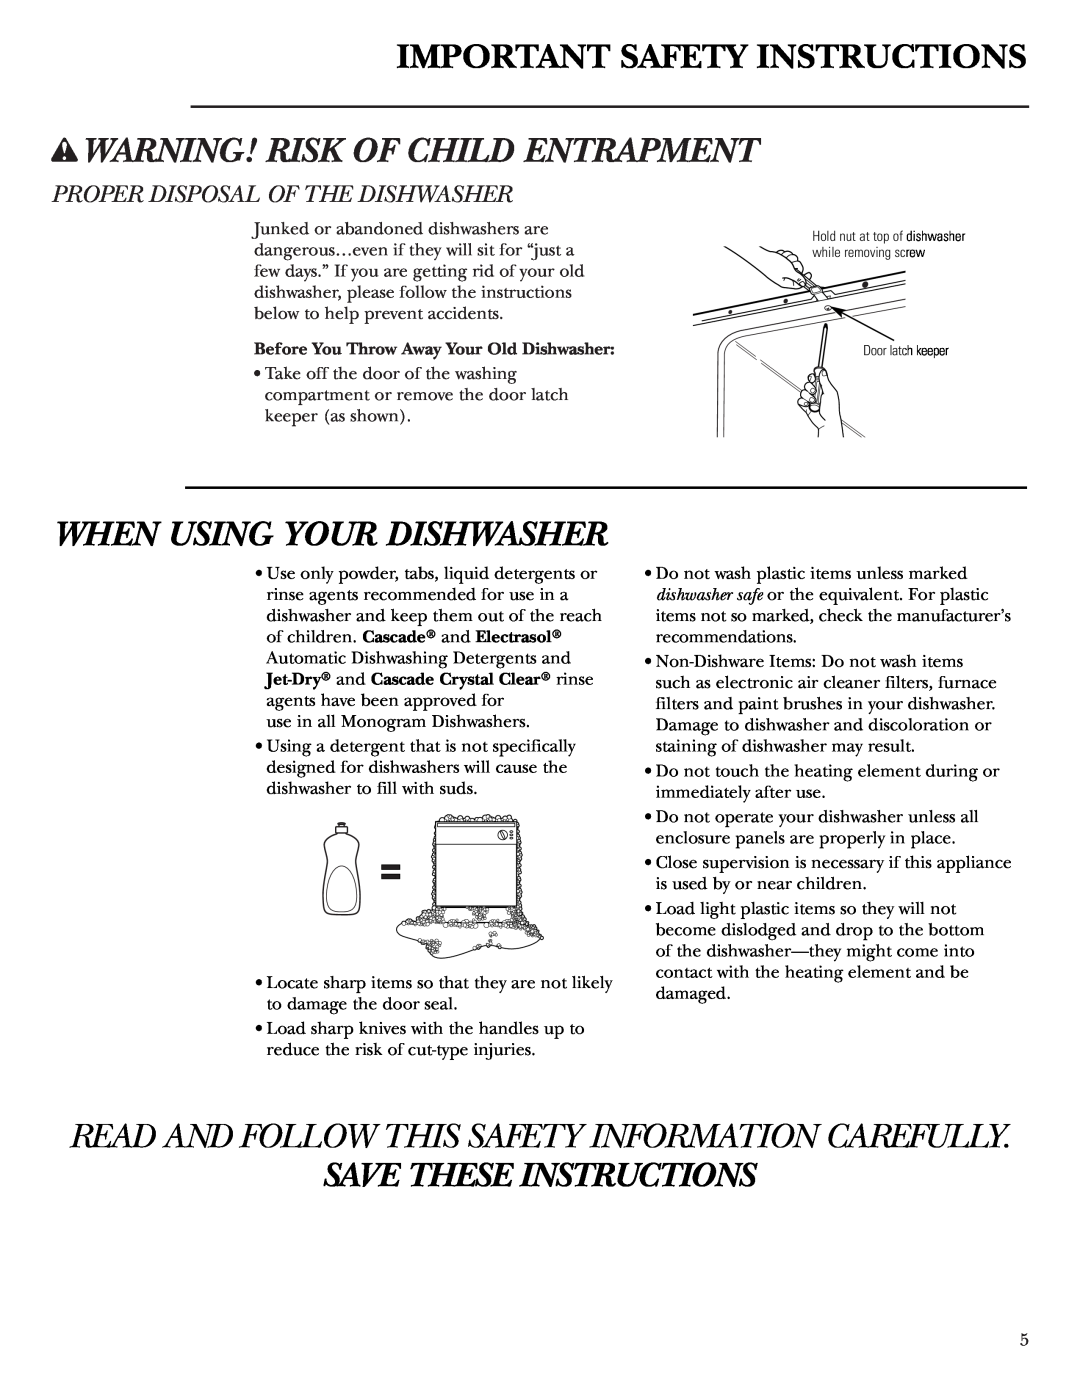 GE ZBD1800 owner manual w WARNING! RISK OF CHILD ENTRAPMENT, When Using Your Dishwasher, Save These Instructions 